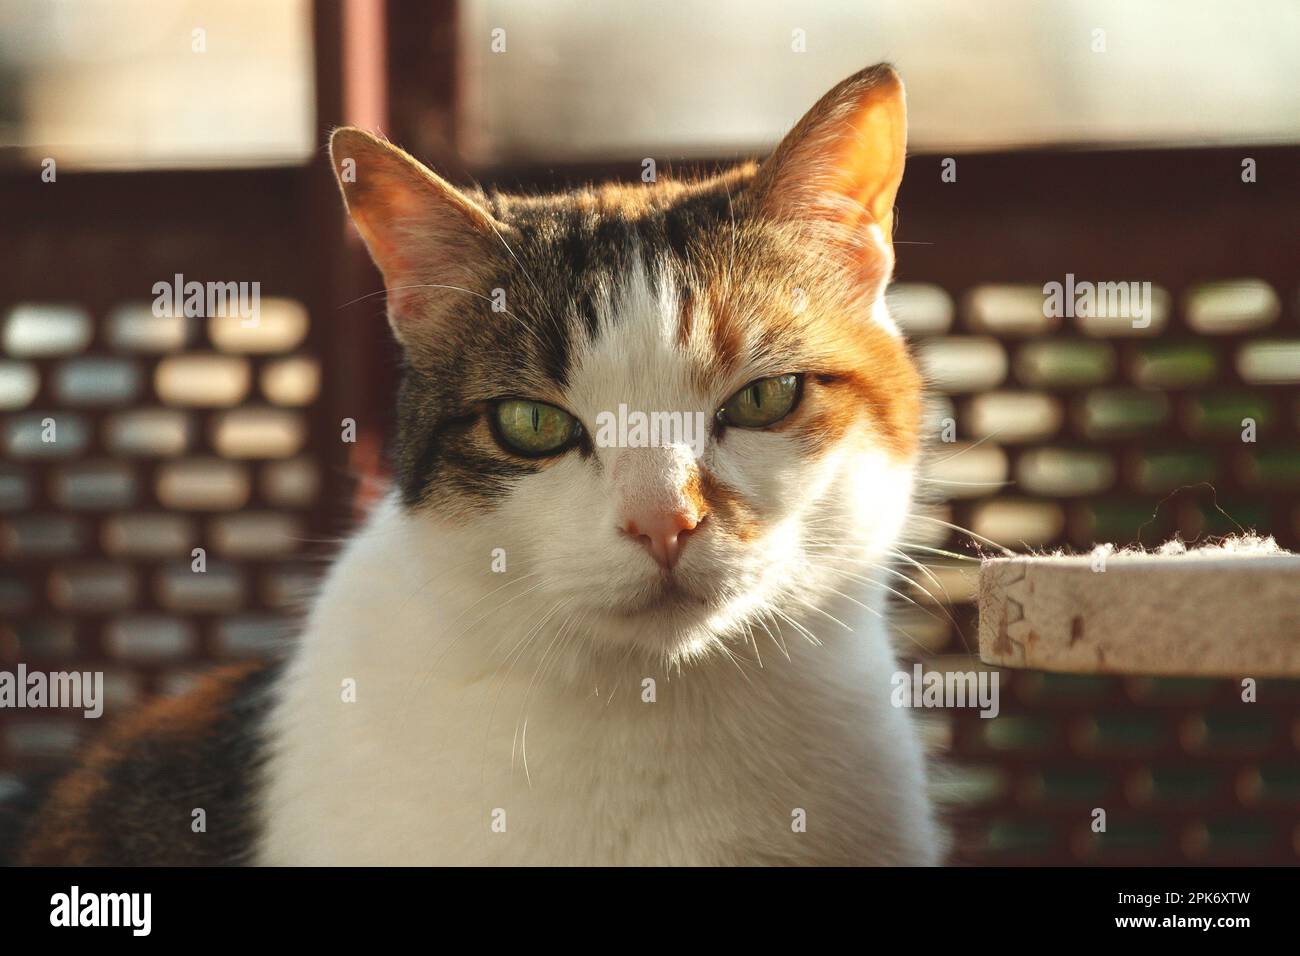 Soft focus of adorable cat with green eyes lying down looking at camera at home Stock Photo